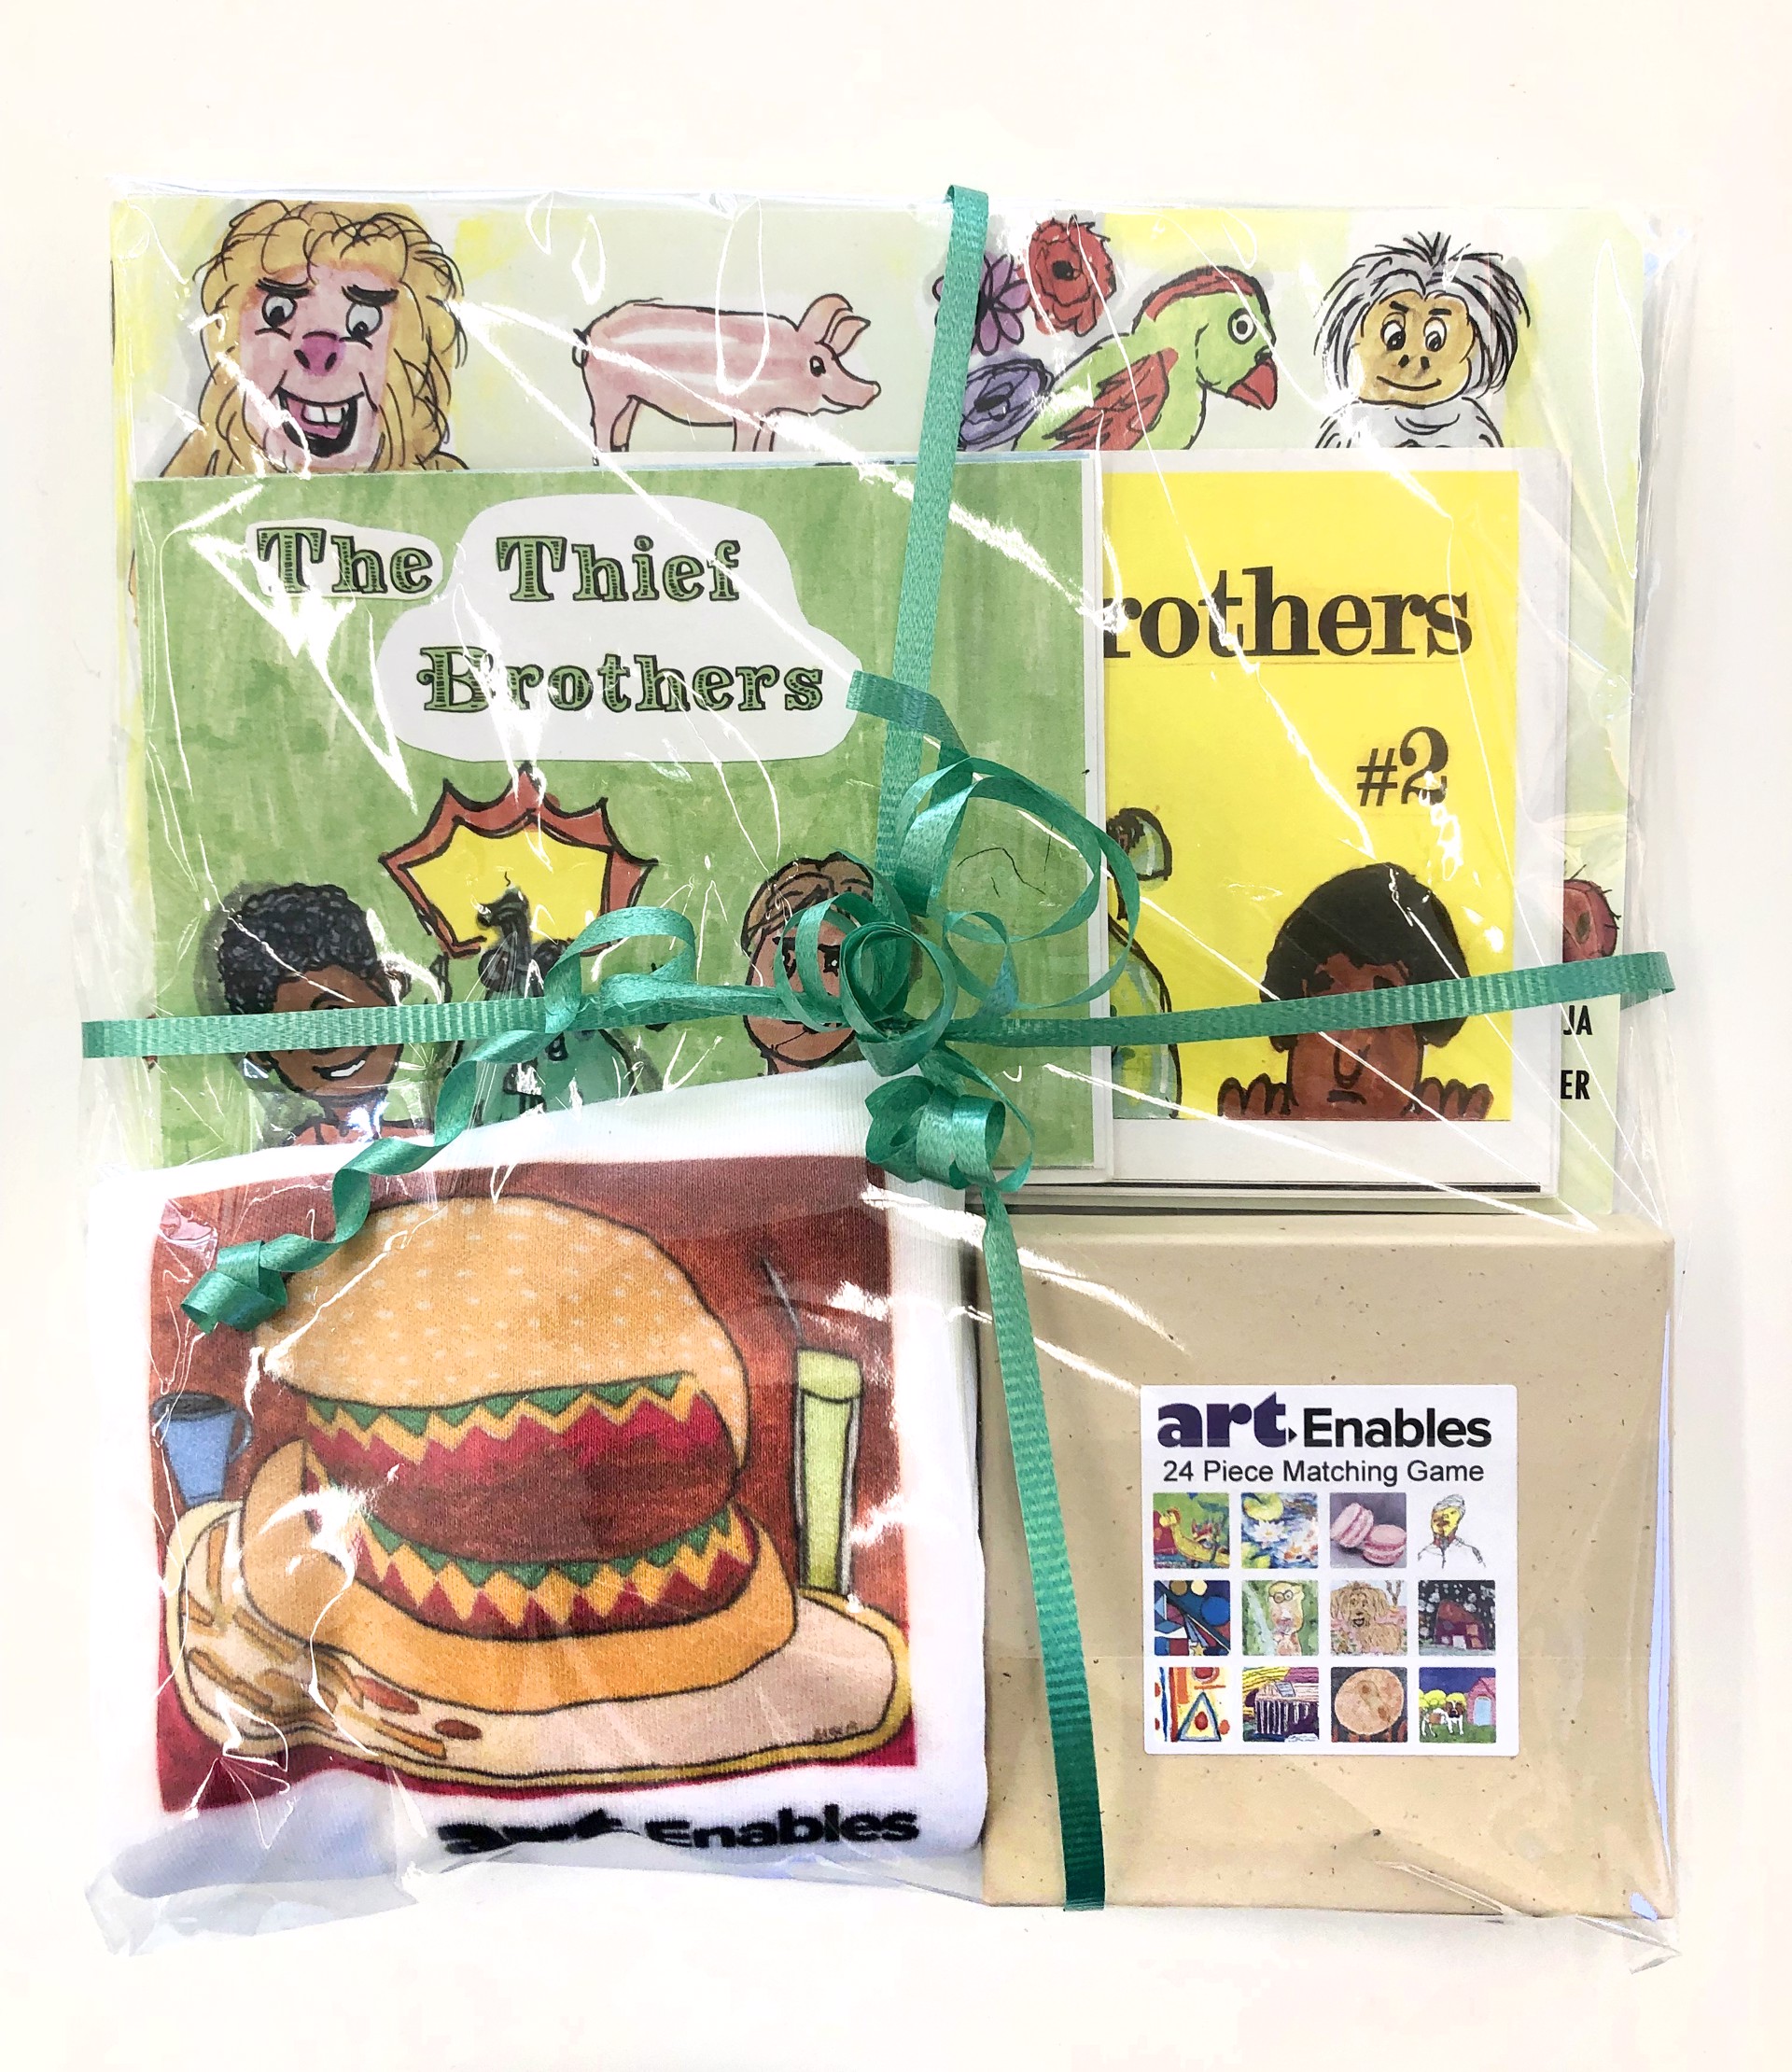 Little One's Library (with cheeseburger onesie) by Art Enables Merchandise